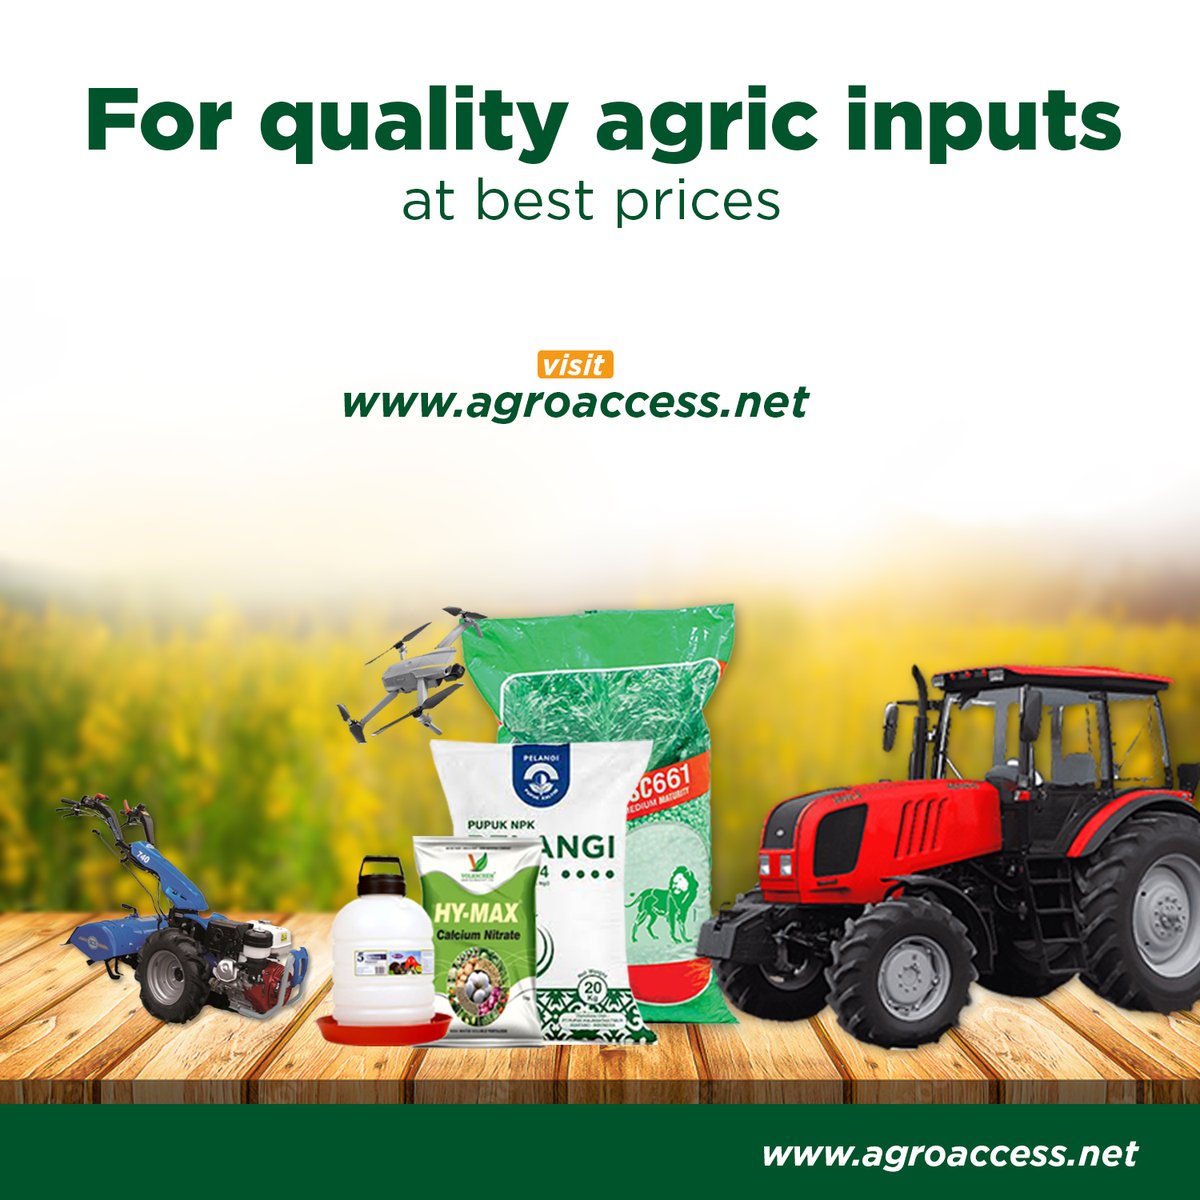 Shop for quality Agric inputs, Fertilizers, Equipment, chemicals, seeds, etc Visit agroaccess.ng to get started.
#farminglife, #farminputs, #fertilizer #poultry, #nigeria, #agriculture, #agroinputs, #farmmachineries, #agronom, #Agribusiness, #agricservice #poultryfarmer